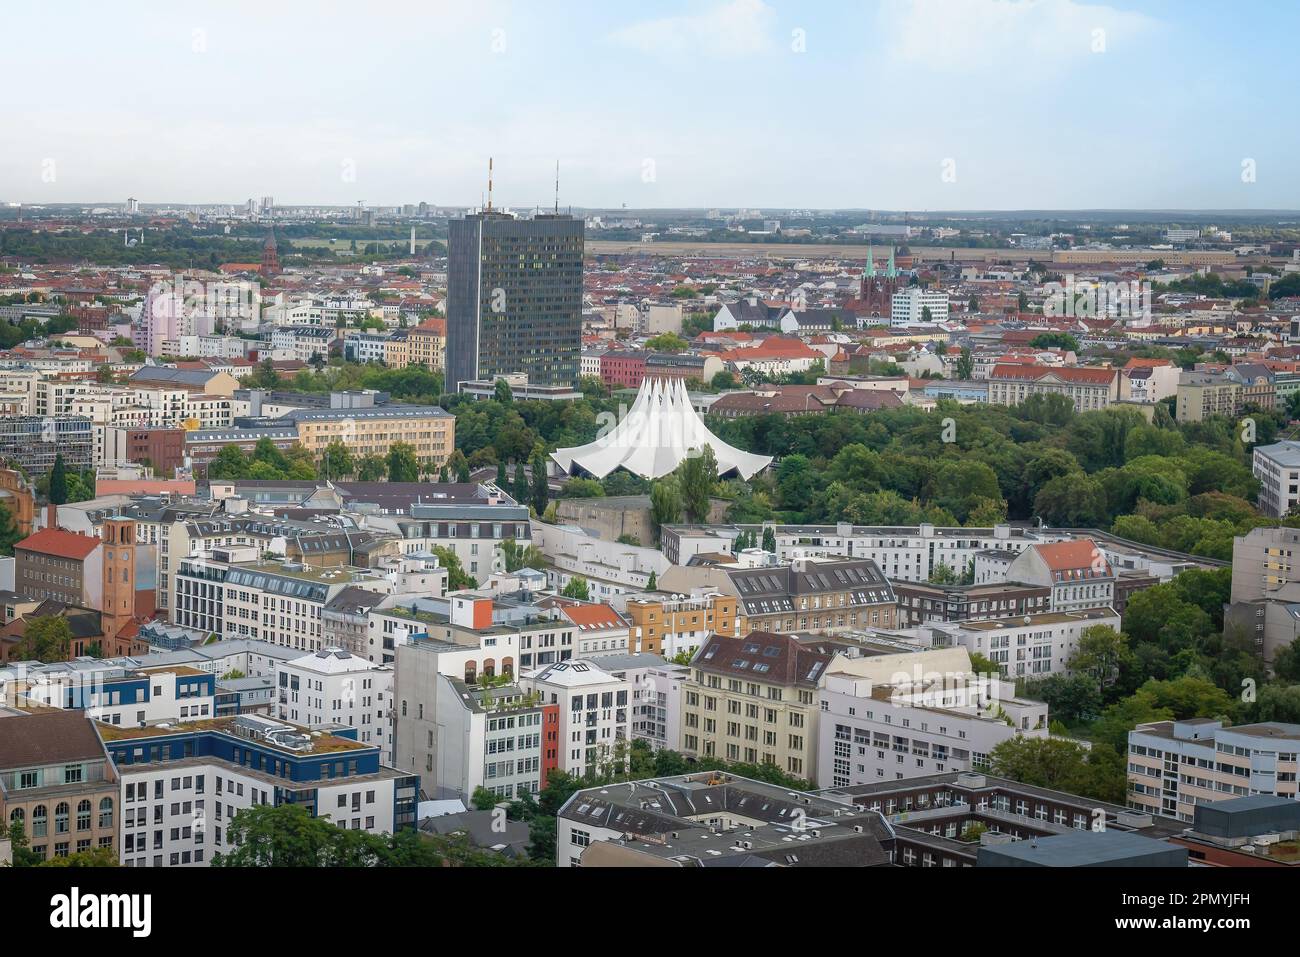 Aerial view of Berlin with Tempodrom - Berlin, Germany Stock Photo